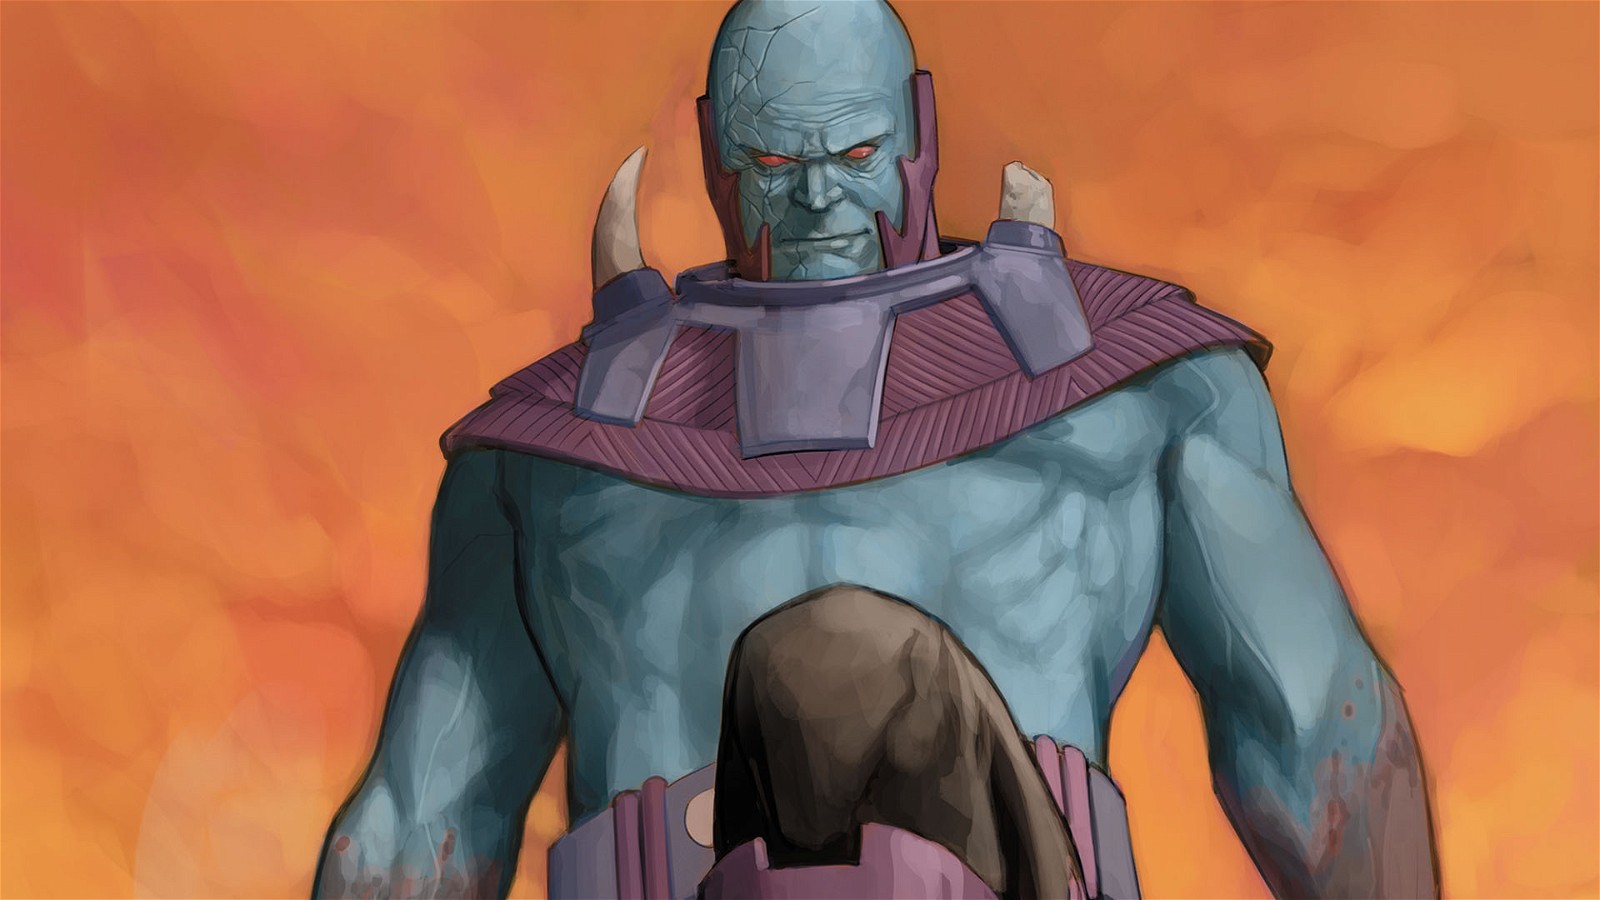 Uranos can be a great villain in the MCU after Thanos